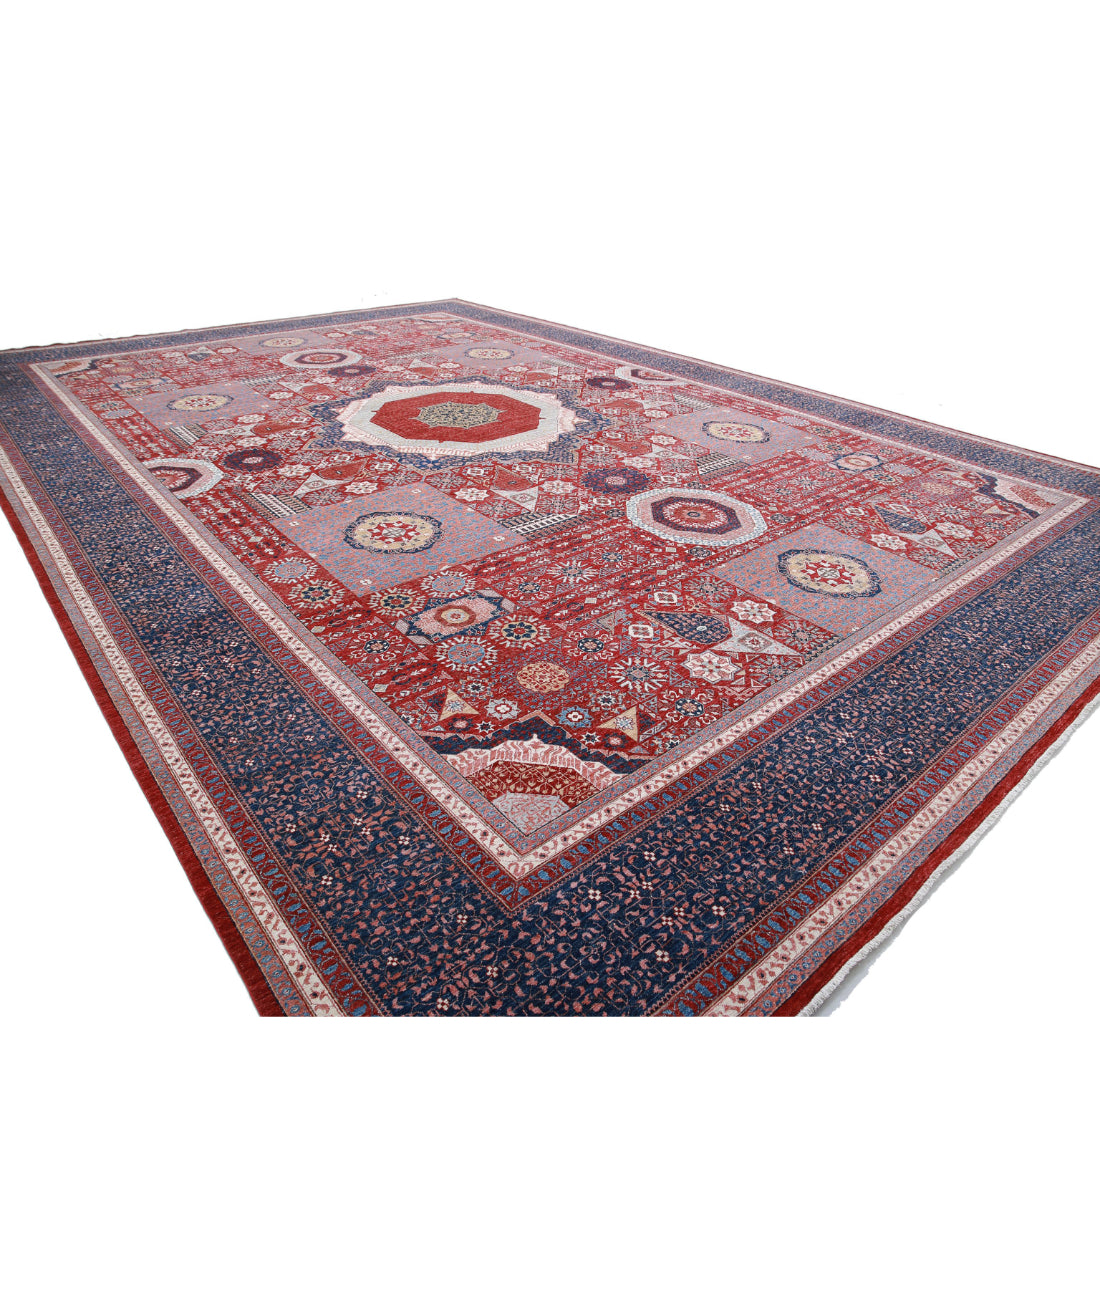 Mamluk 16'5'' X 24'5'' Hand-Knotted Wool Rug 16'5'' x 24'5'' (493 X 733) / Red / Blue